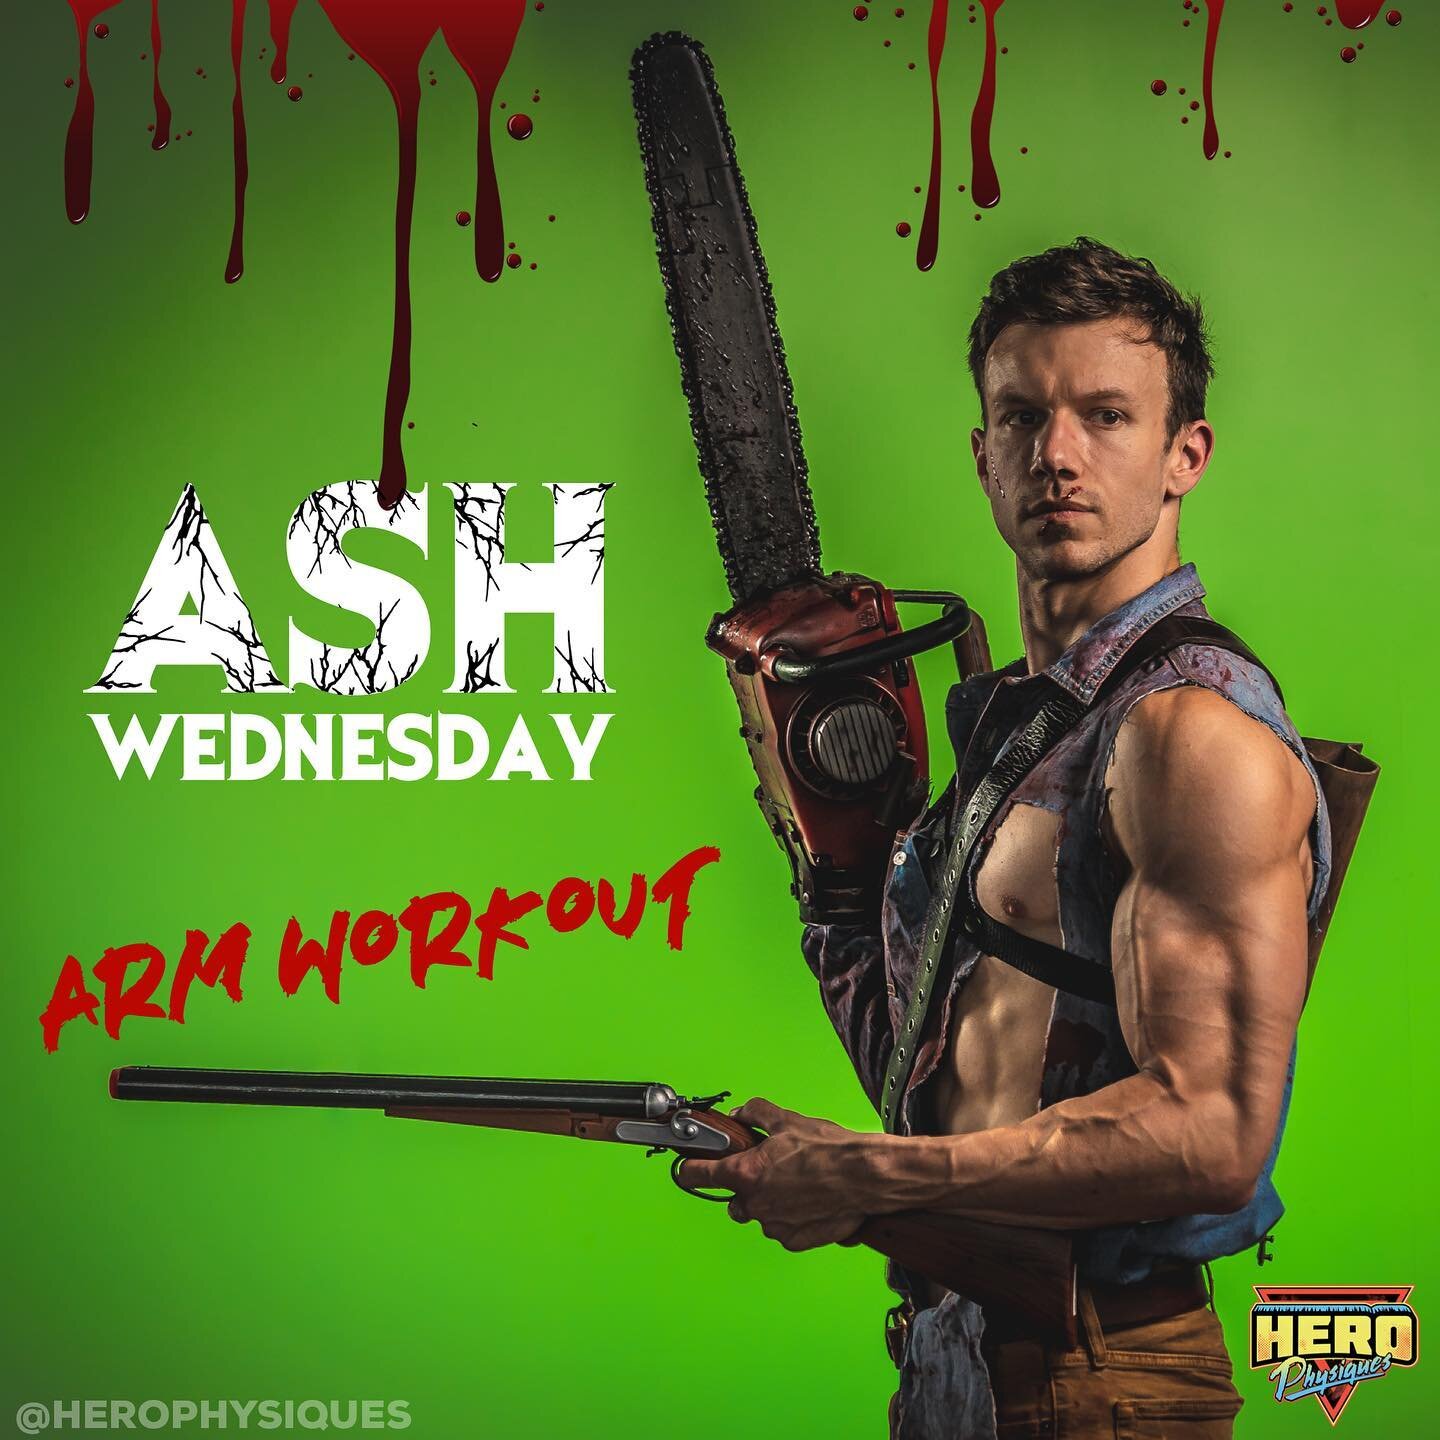 The REAL Ash Wednesday, amirite?!
.
Here&rsquo;s one of the arm workouts that I had in one of my mesocycles leading up to this shoot a few years ago. Enjoy!
.
📸 by @hero.fit
Chainsaw by @nickssawmart
.
.
.
.
#AshWednesday #AshWilliams #HeroPhysiques